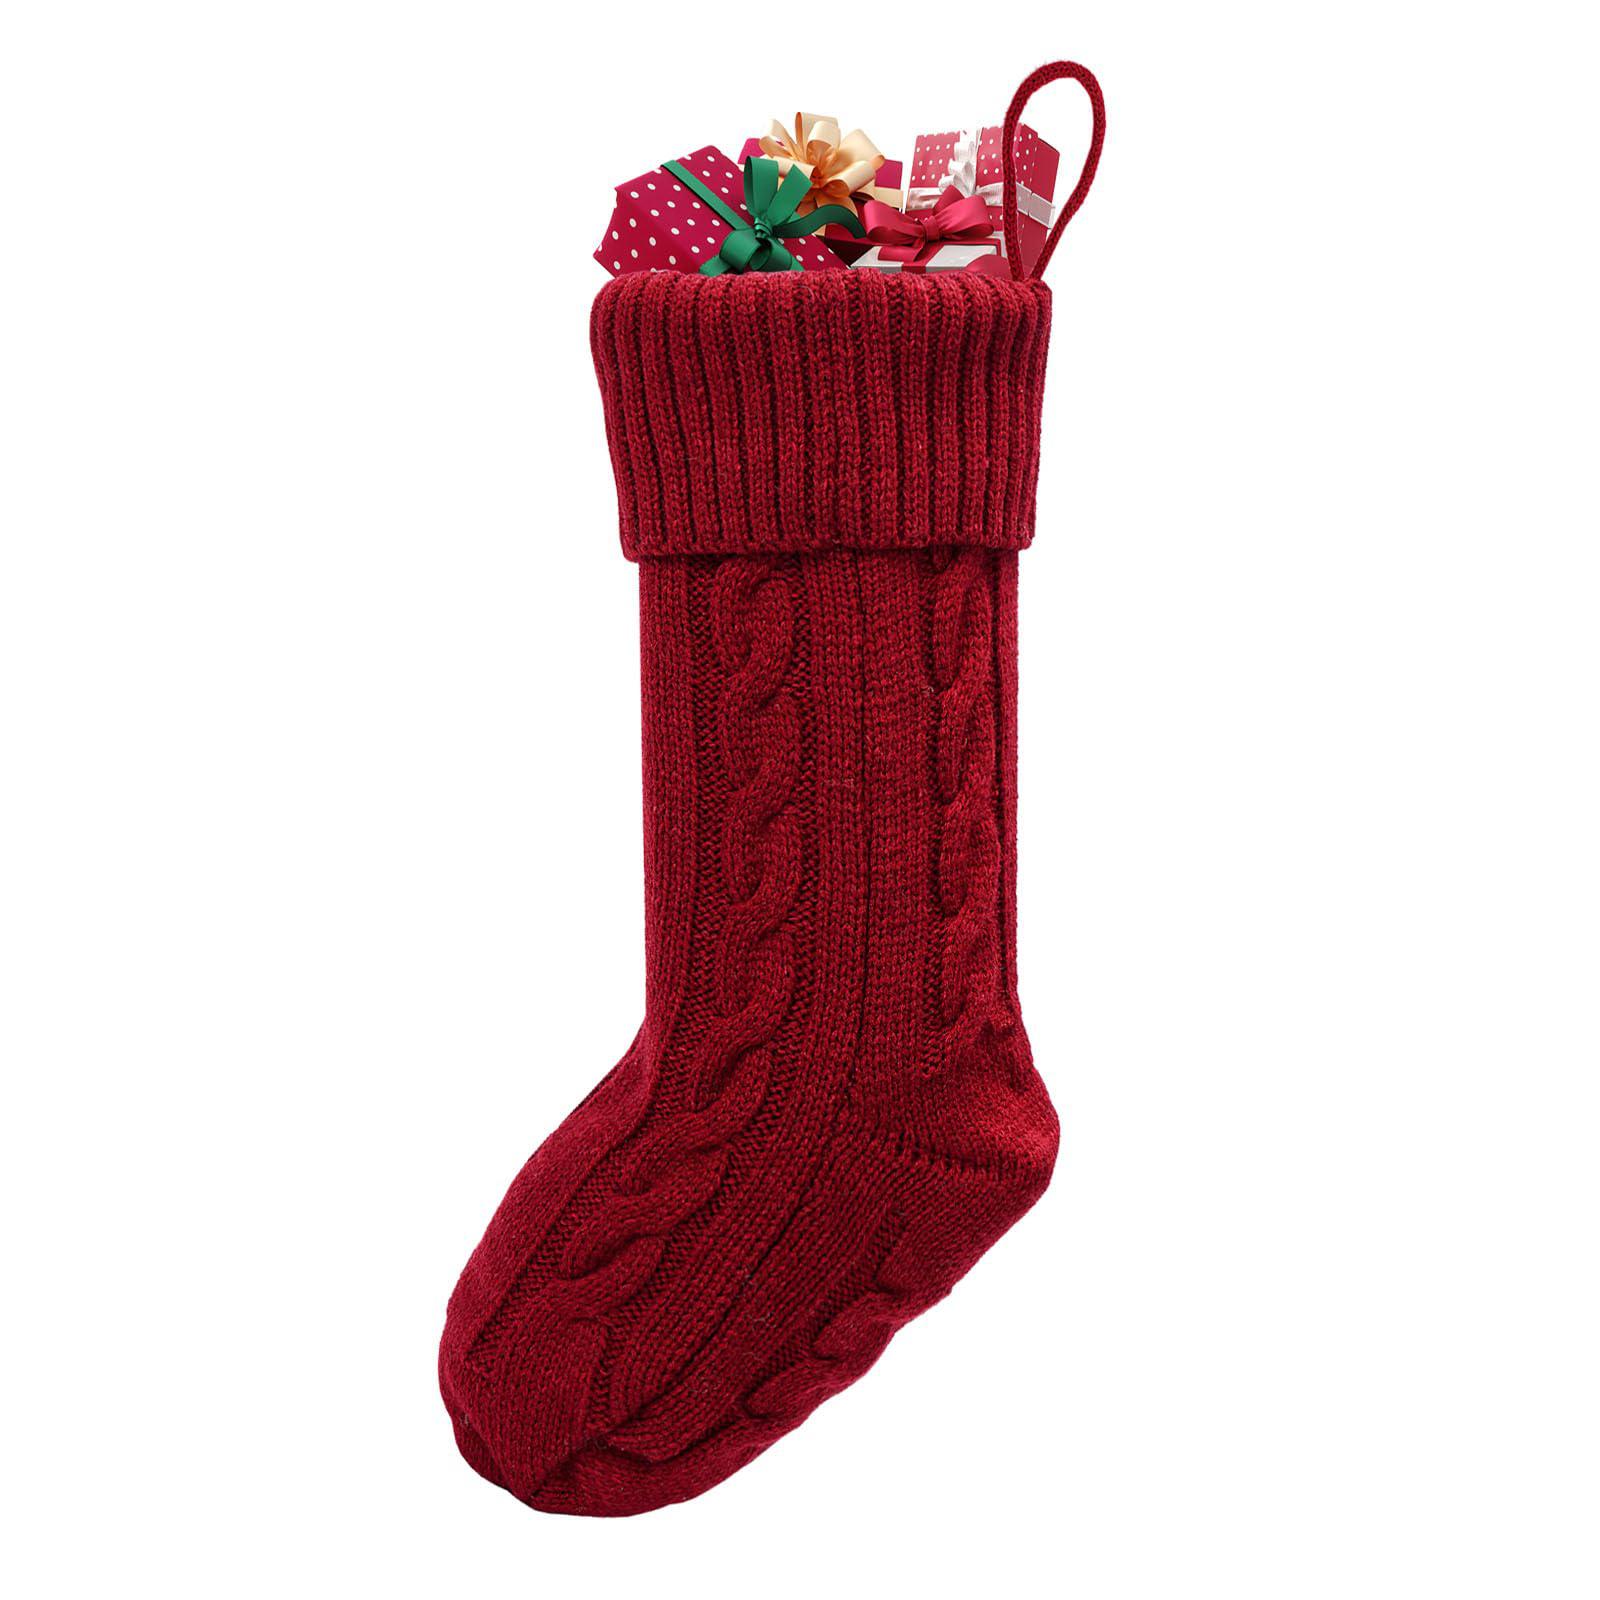 acomeplsz 6pc christmas stocking, large size cable knitted stocking gifts stocking decorations for family holiday season deco